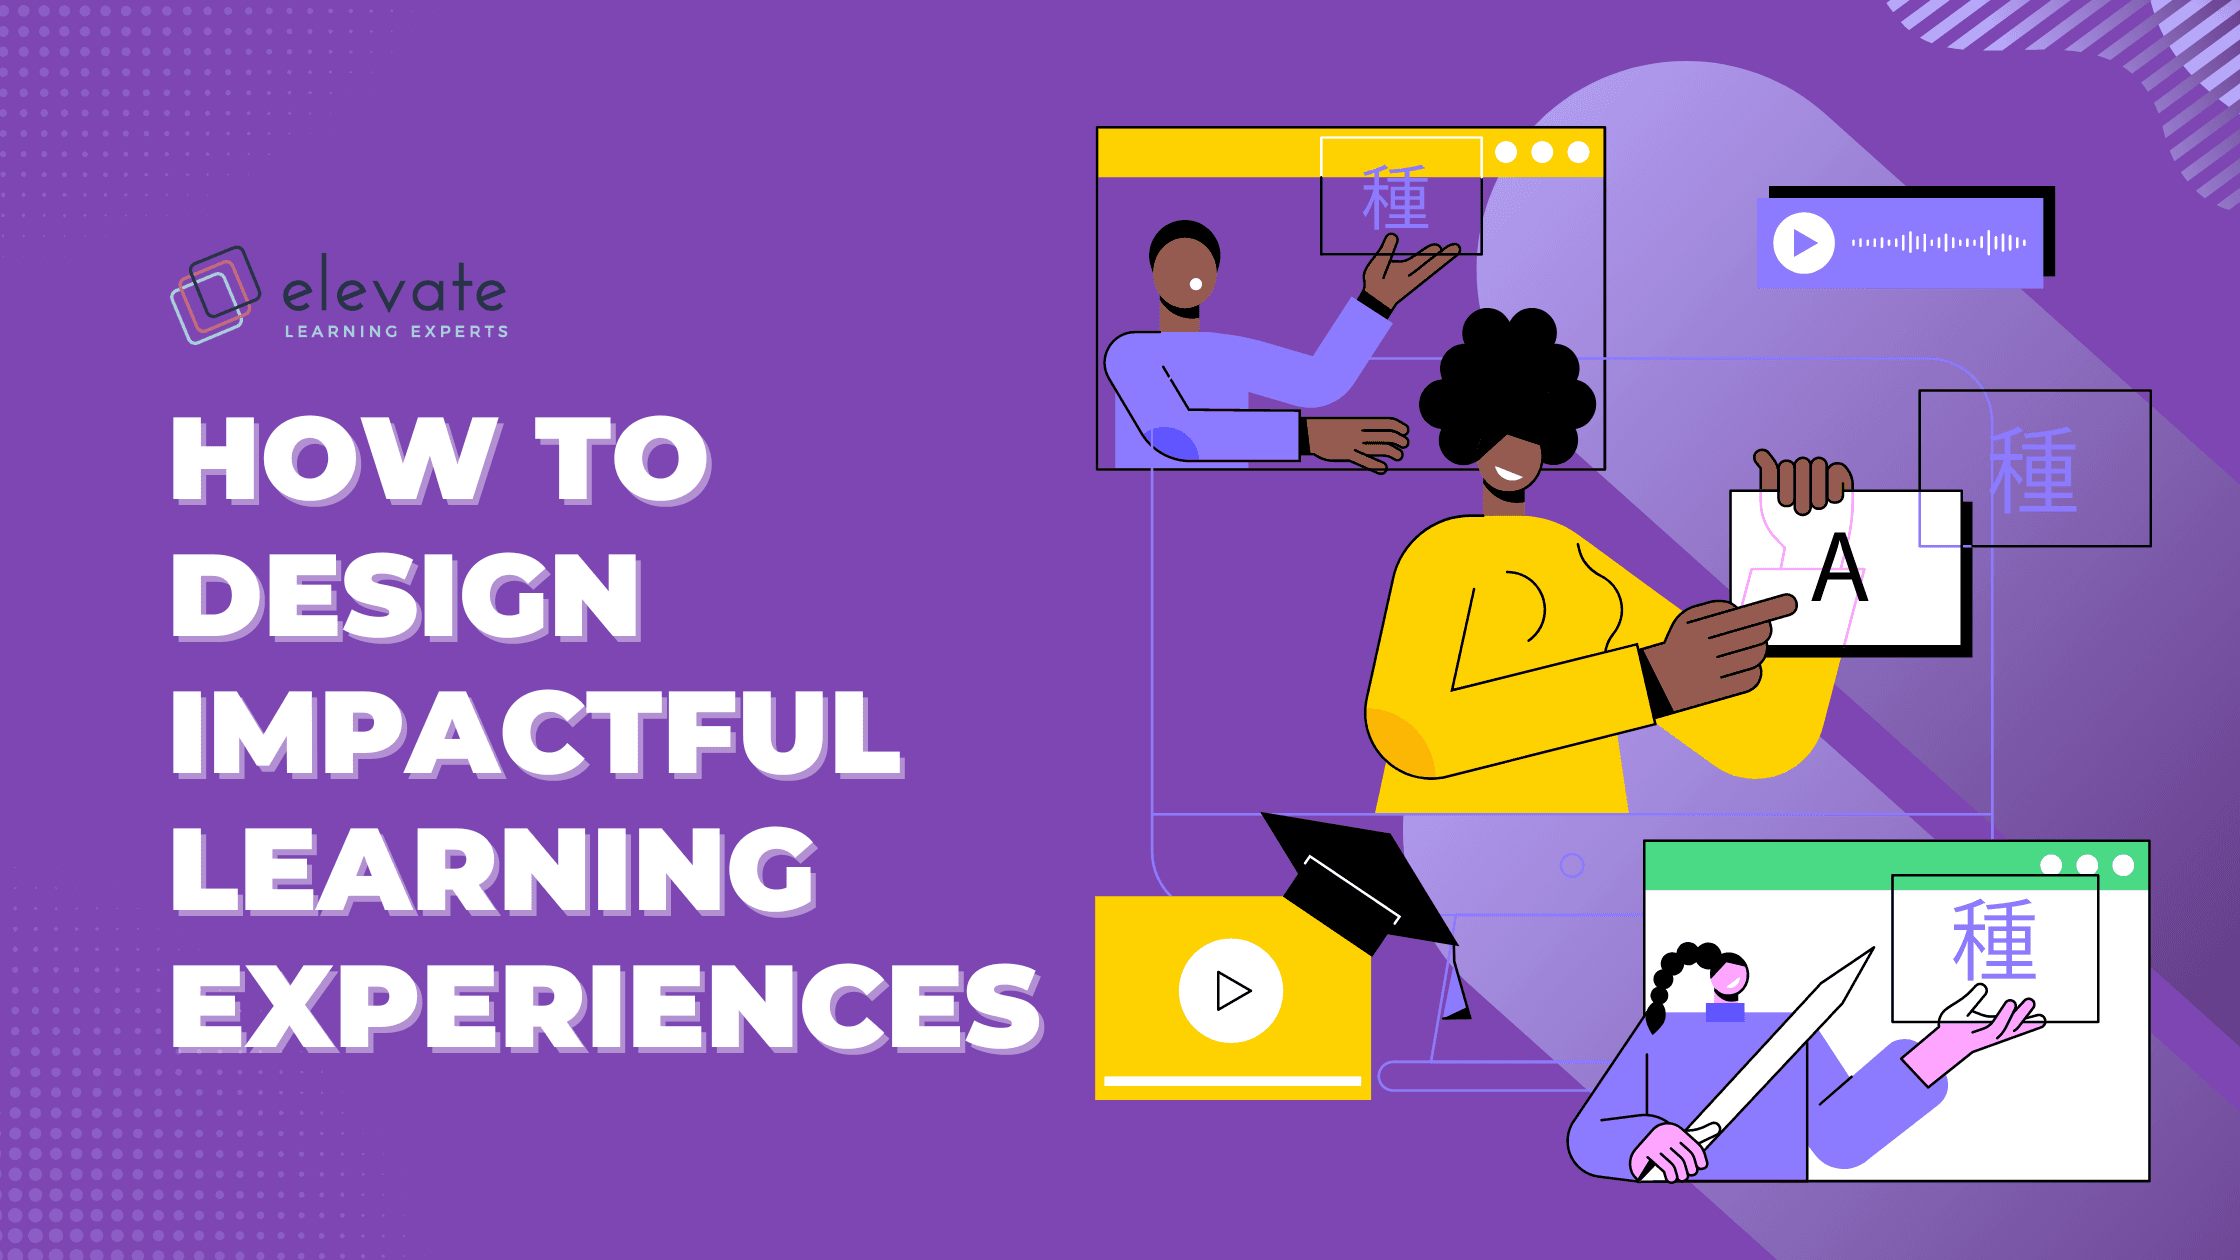 How to Design Impactful Learning Experiences